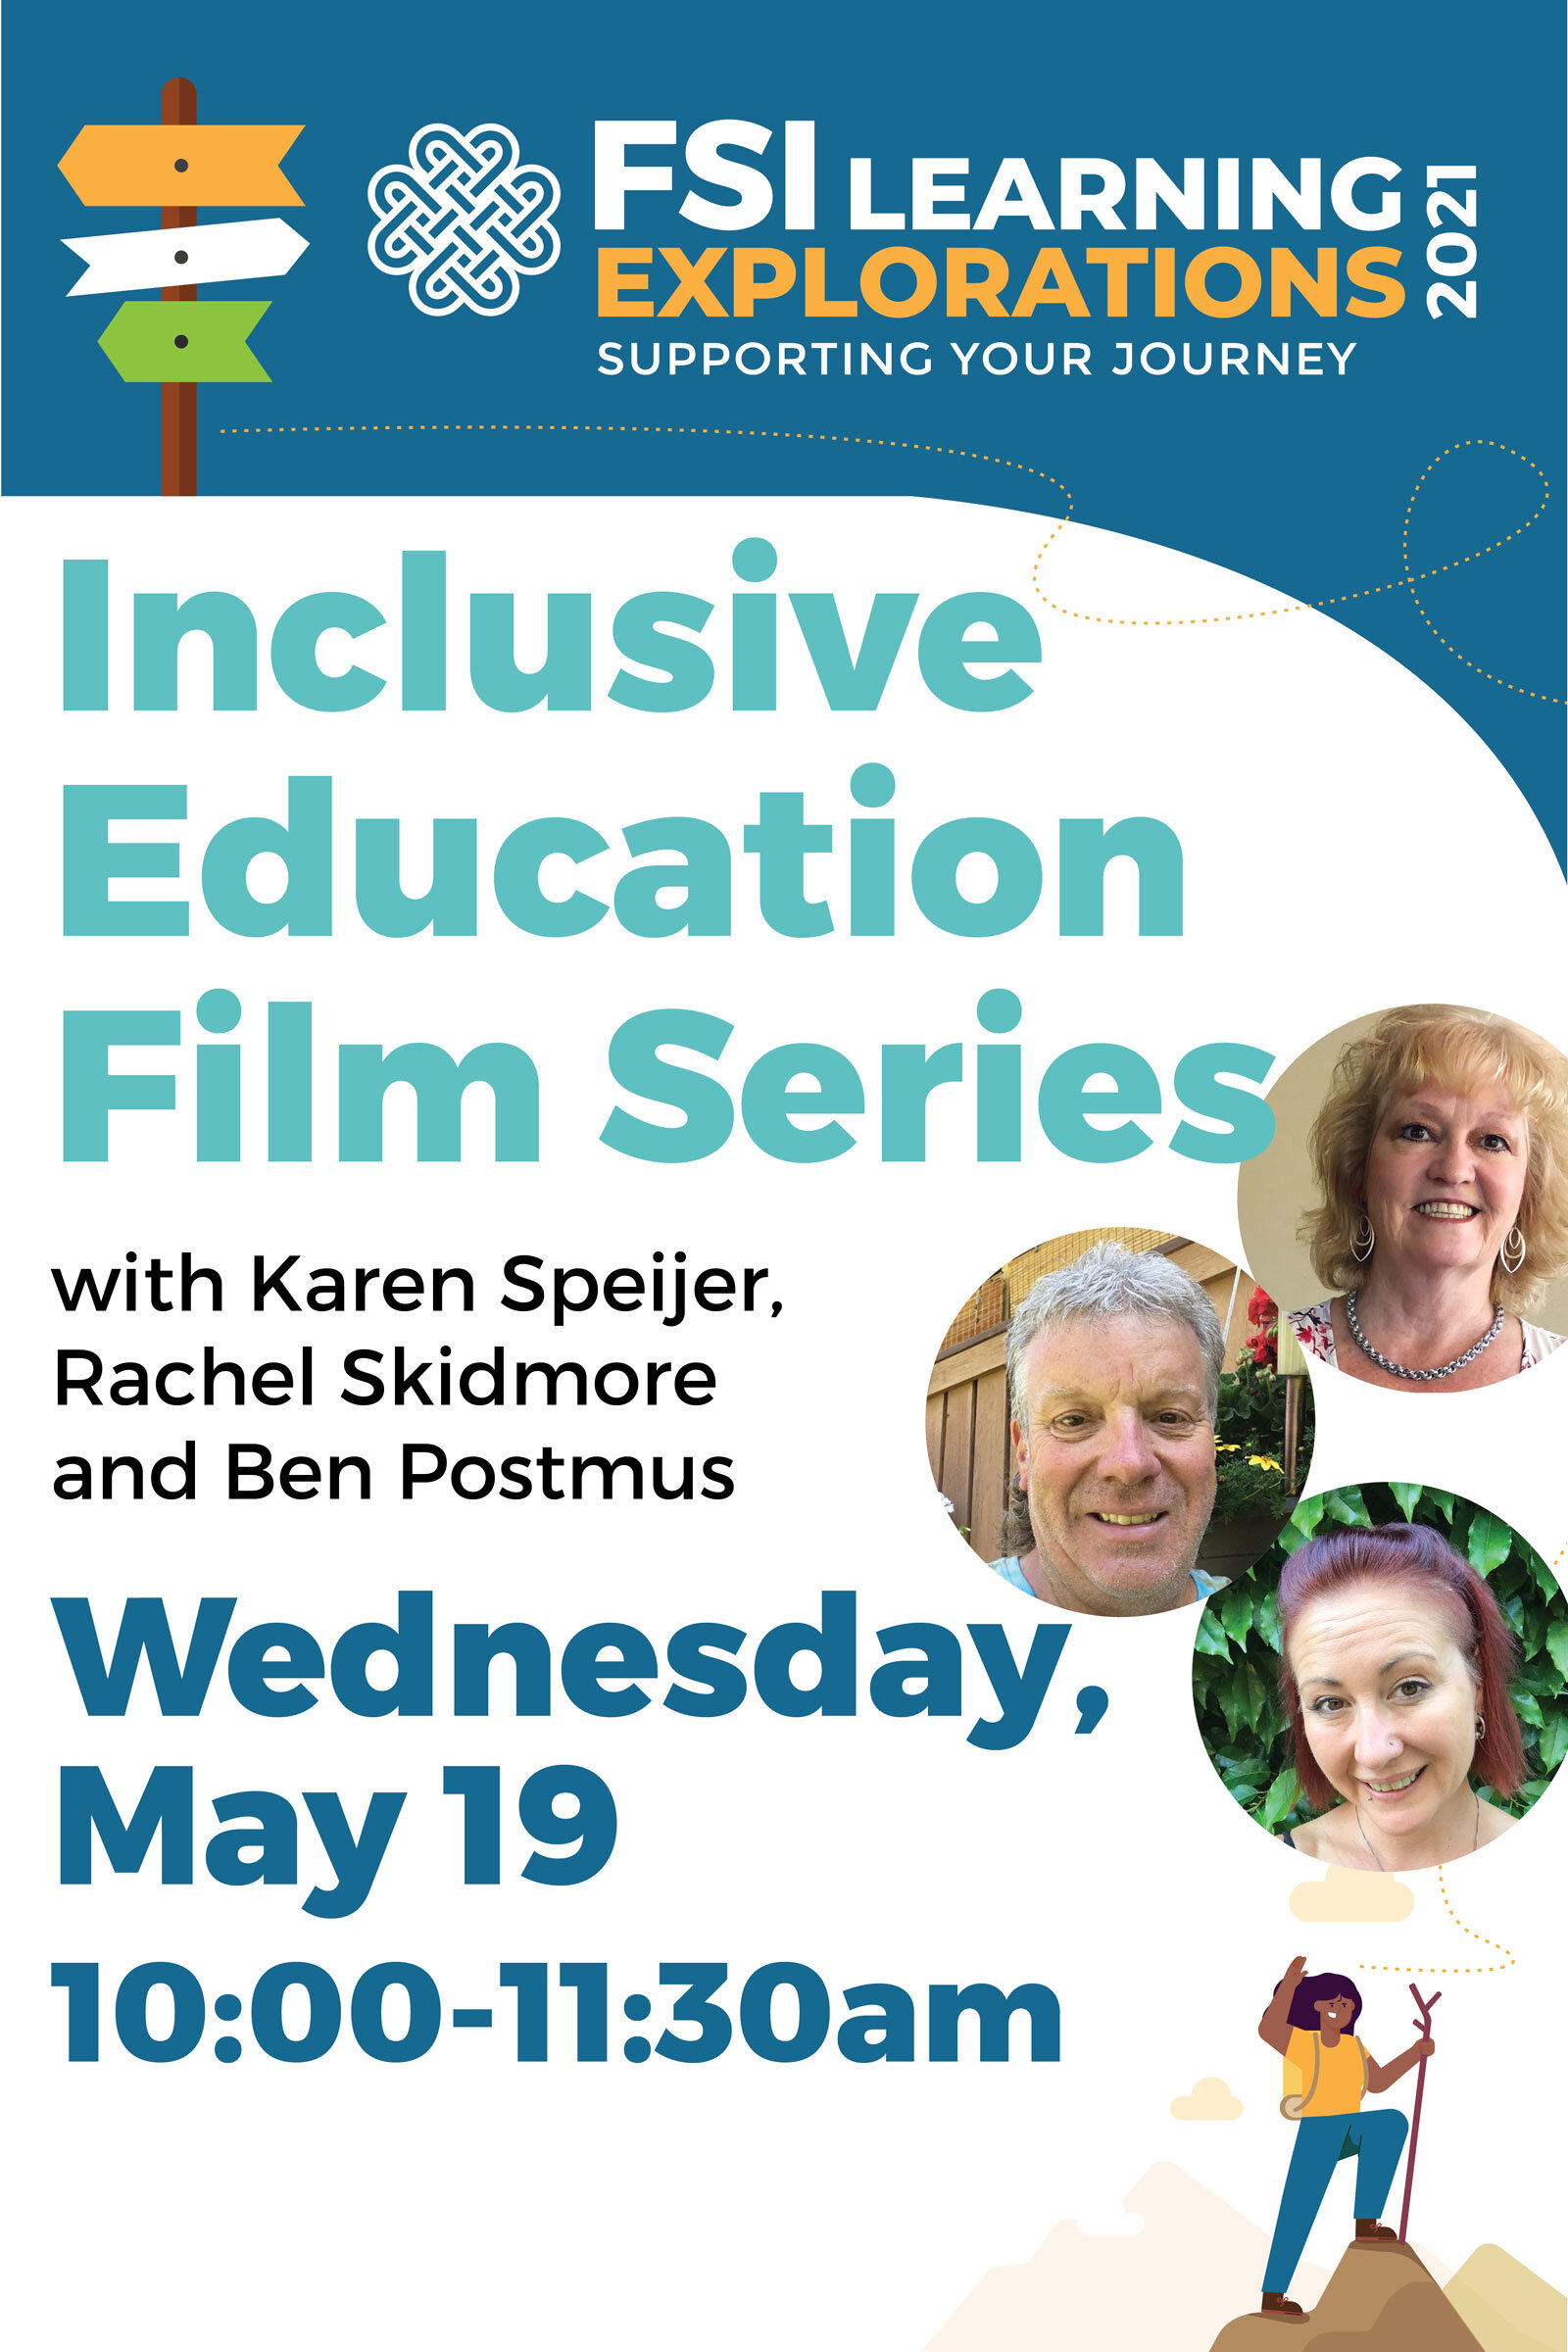 FSI Learning Explorations - Inclusive Education Film Series